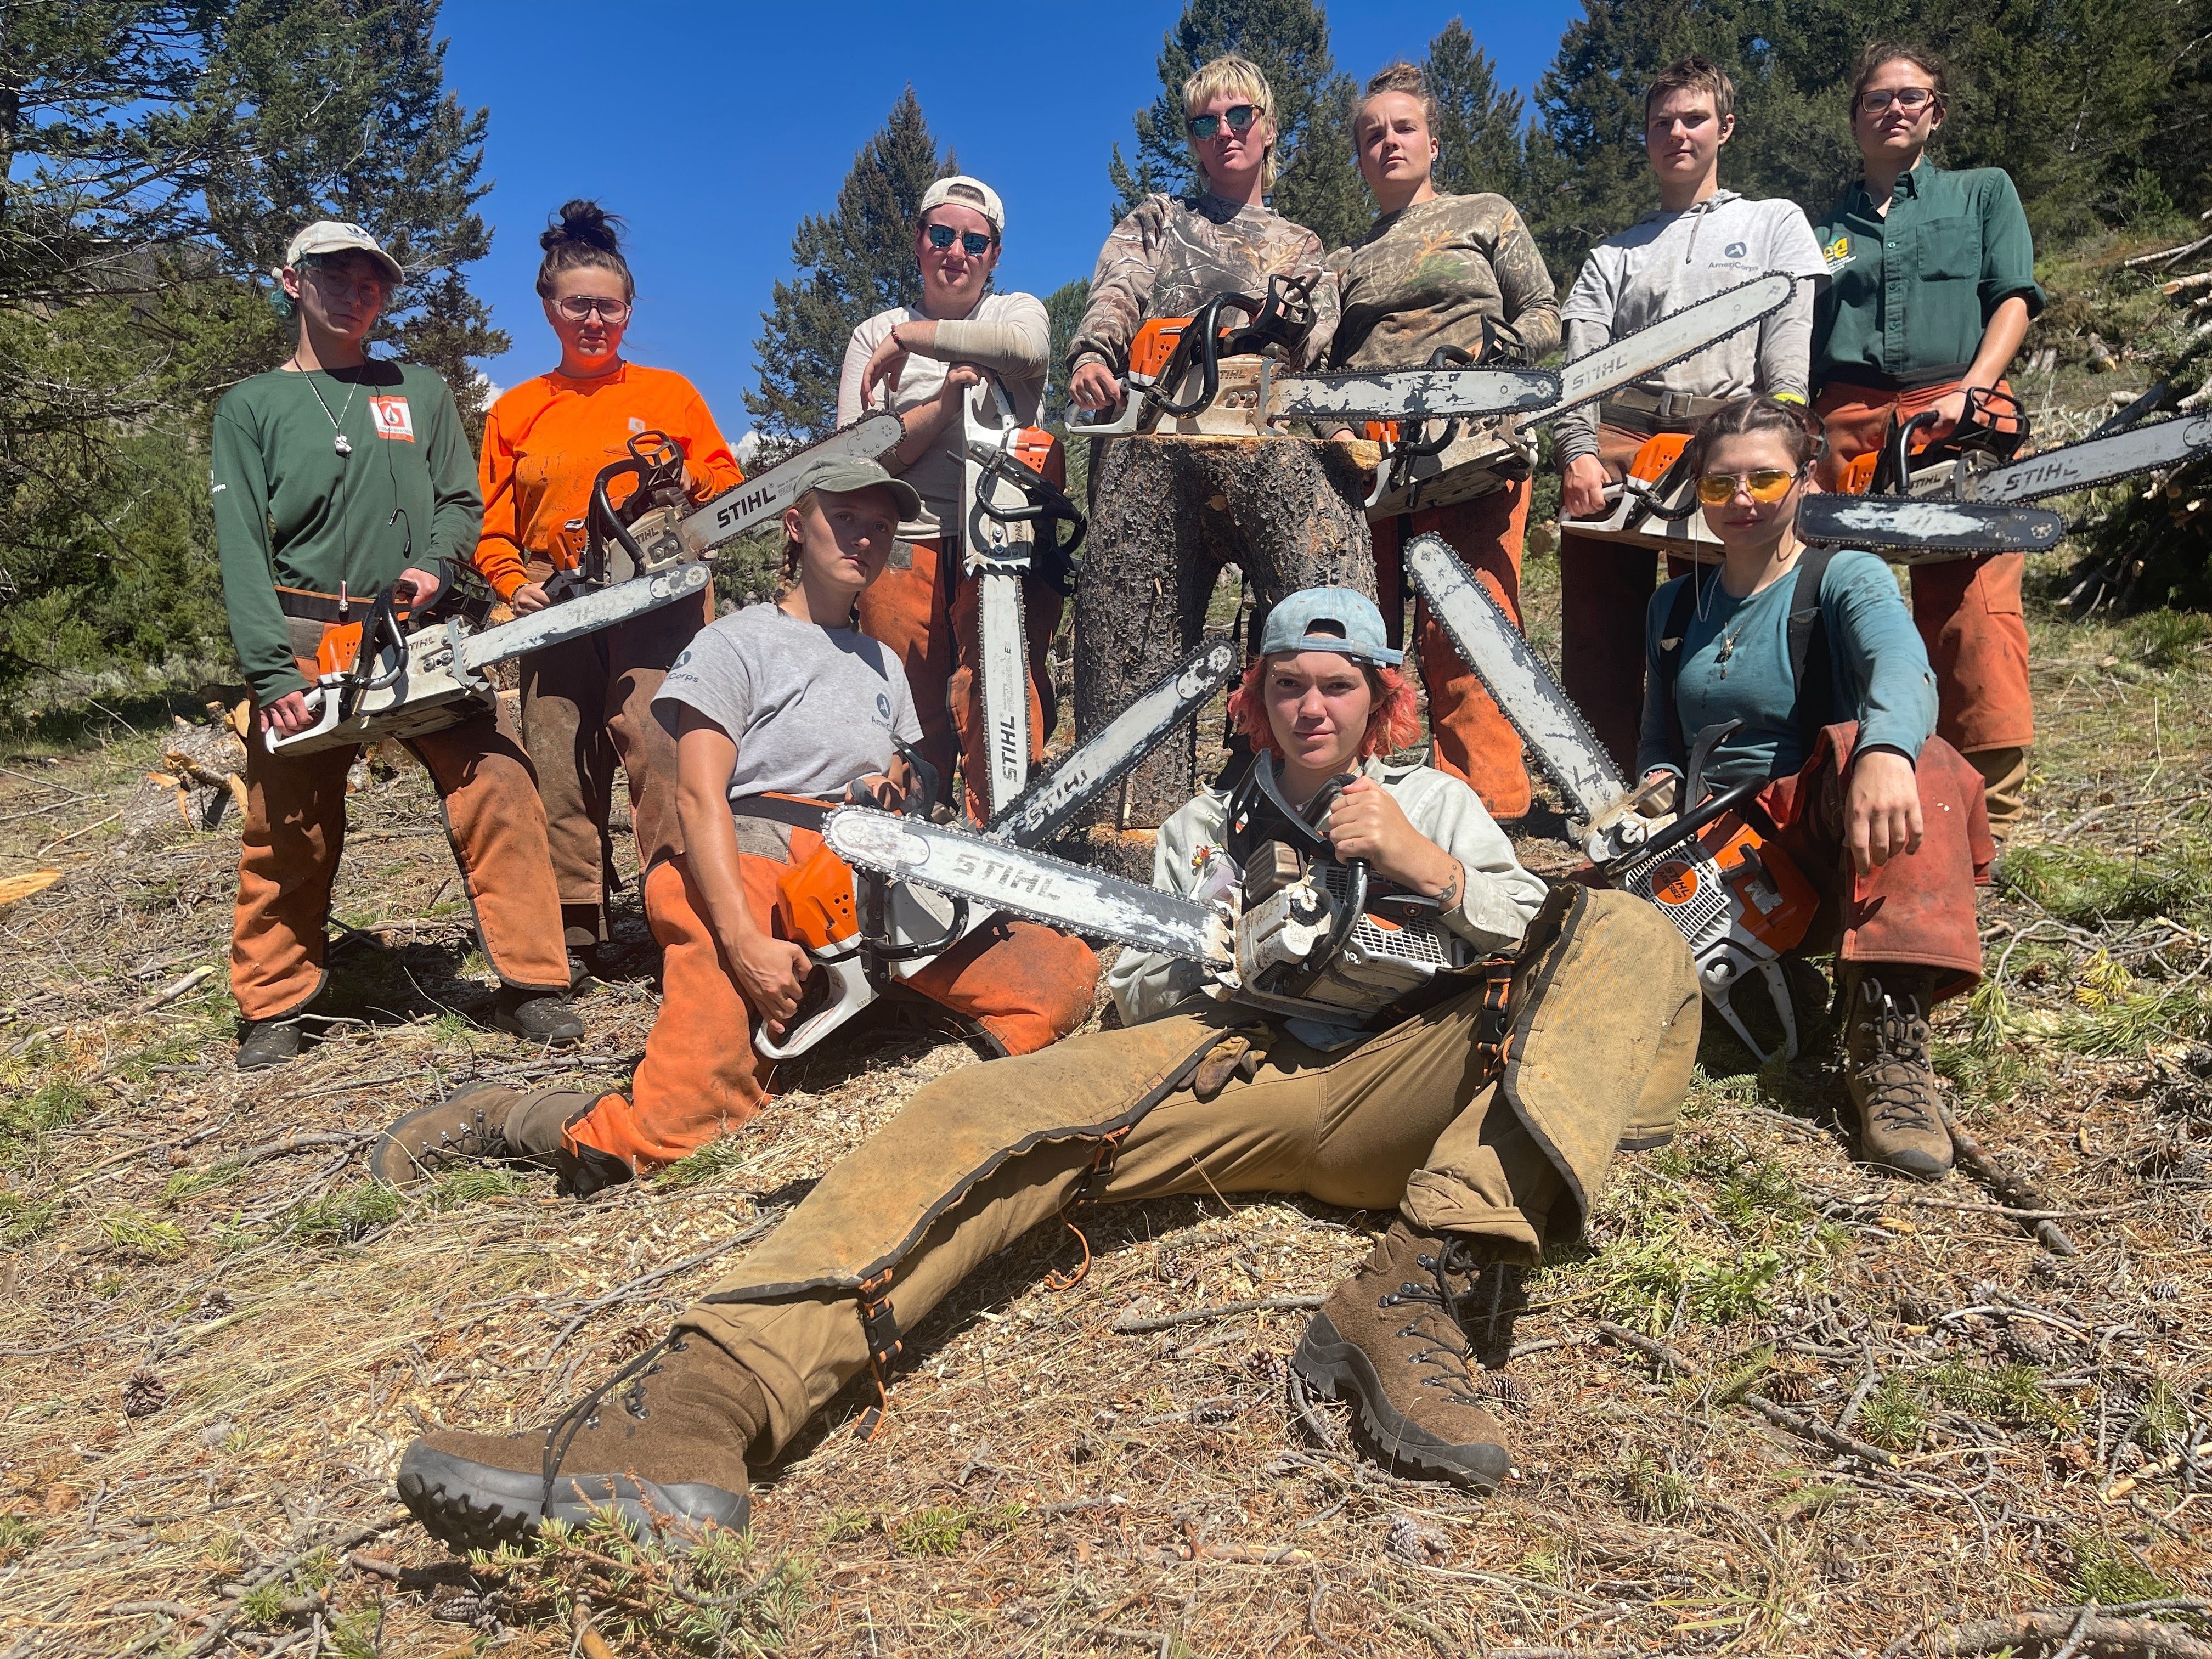 The women's fuels and fire crew all poses with their saws and full gear, fierce looks on their faces.